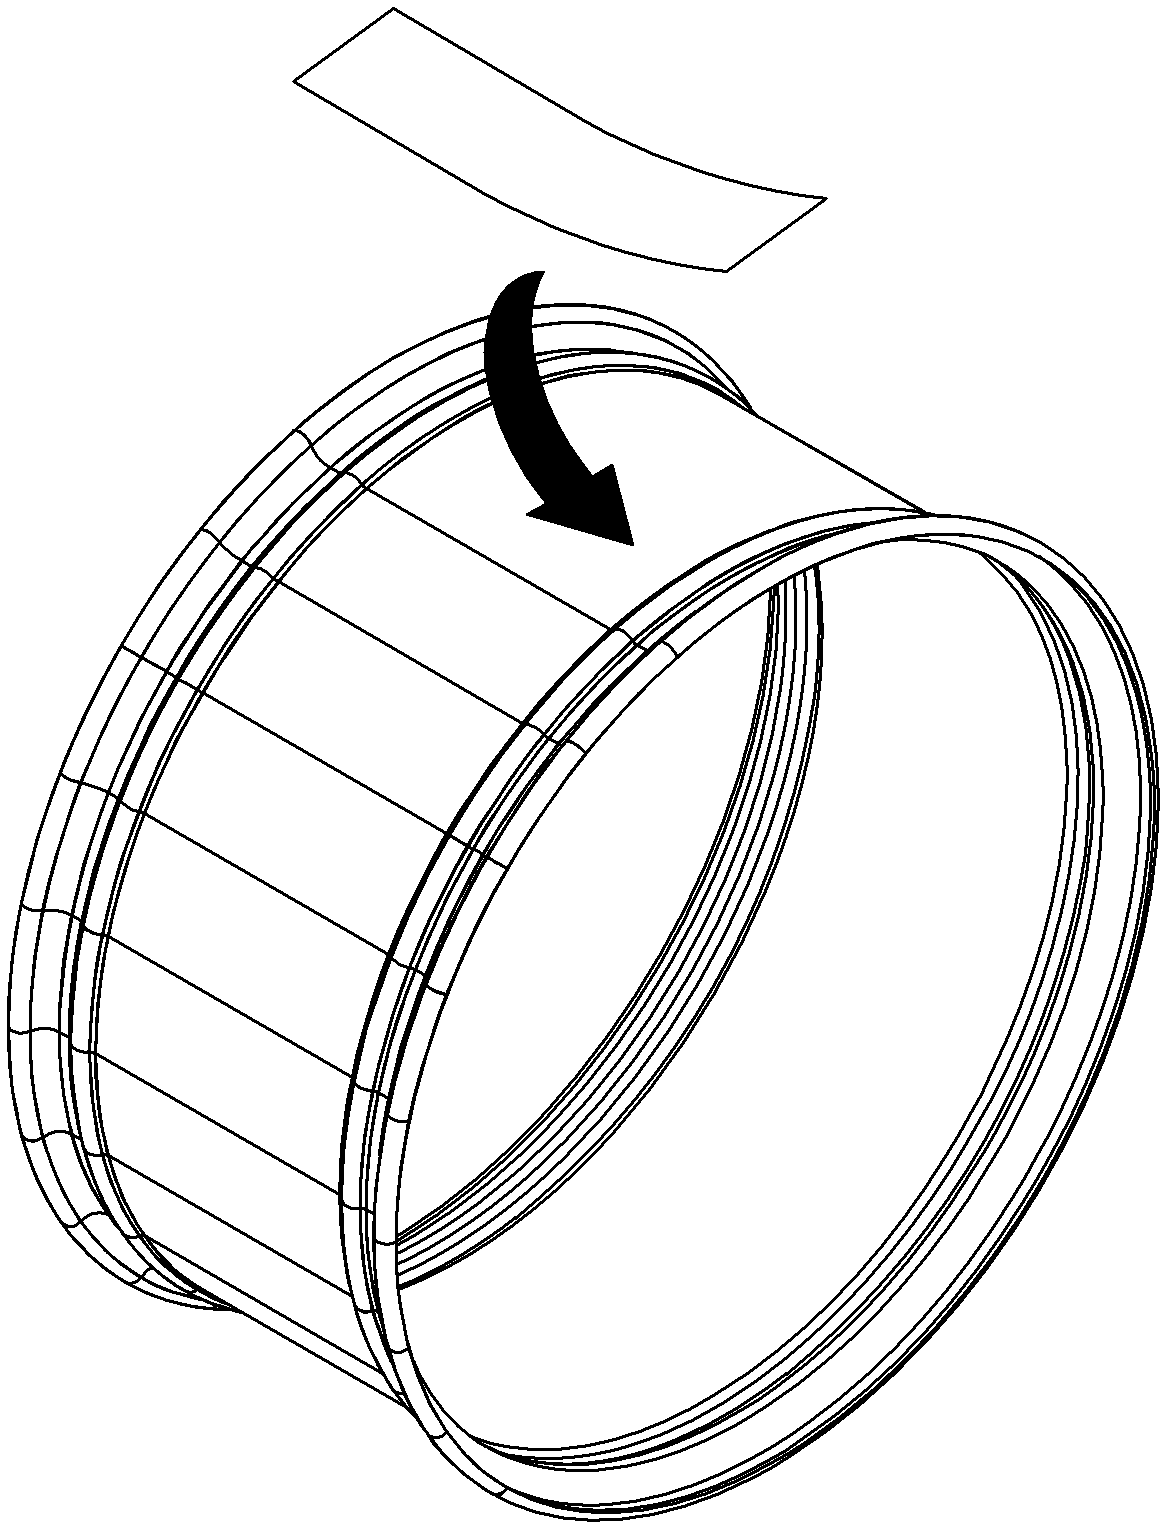 Composite wheel frame manufactured from single-warp weaving carbon fibers and manufacturing method thereof